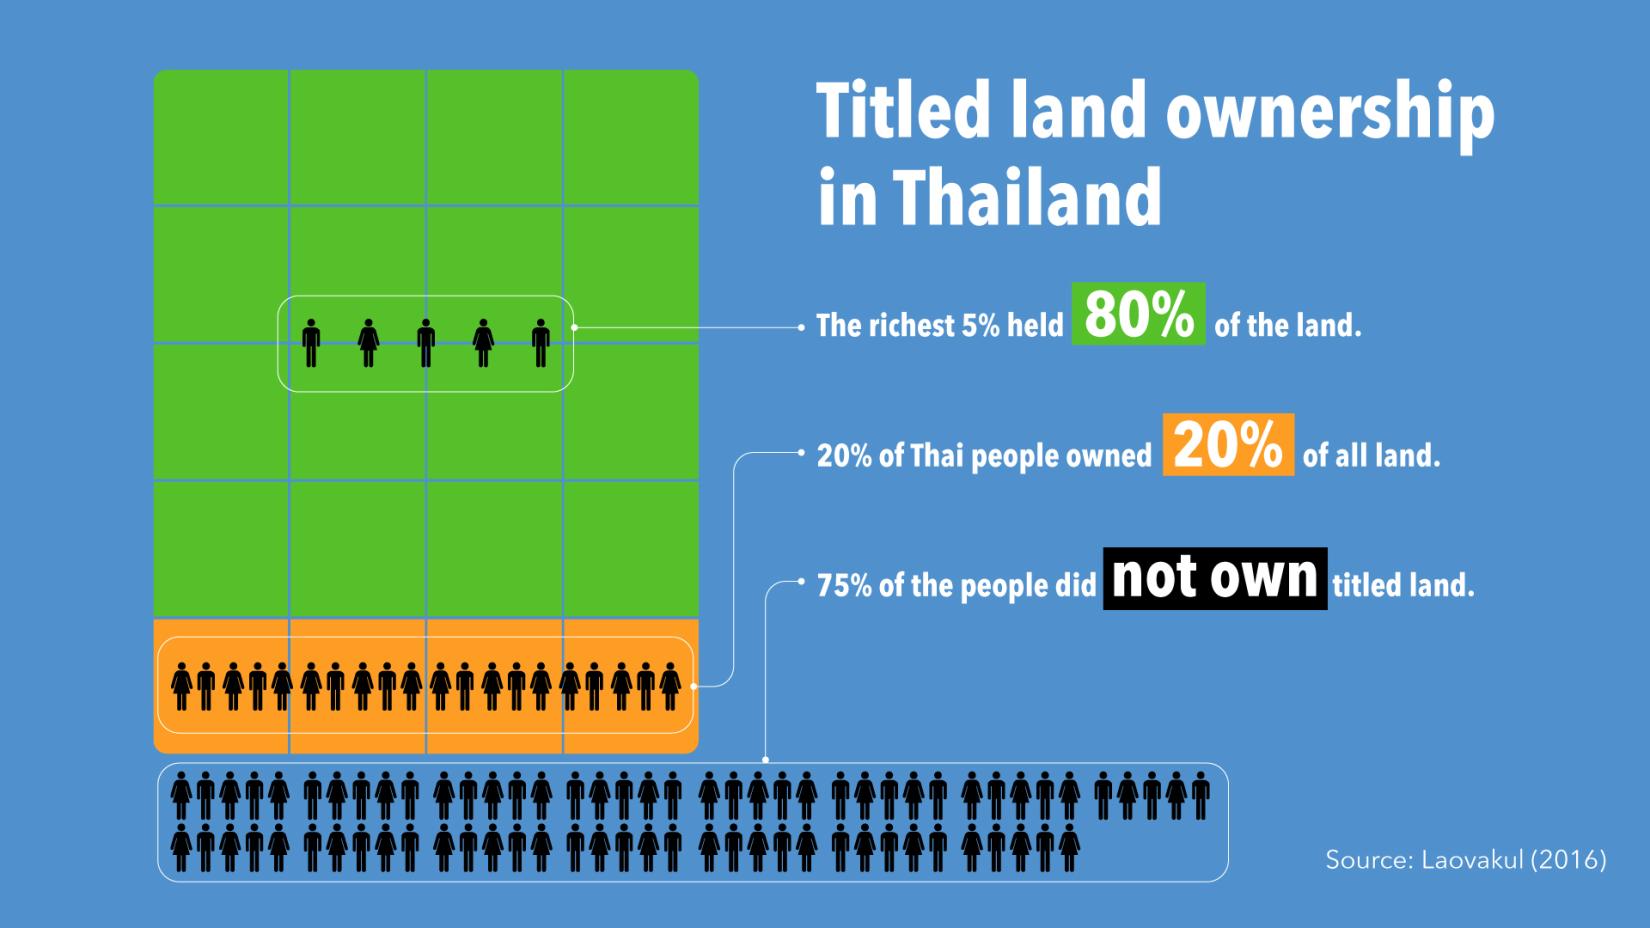 Thailand’s inequality in land possession is extremely high for a country at this level of development